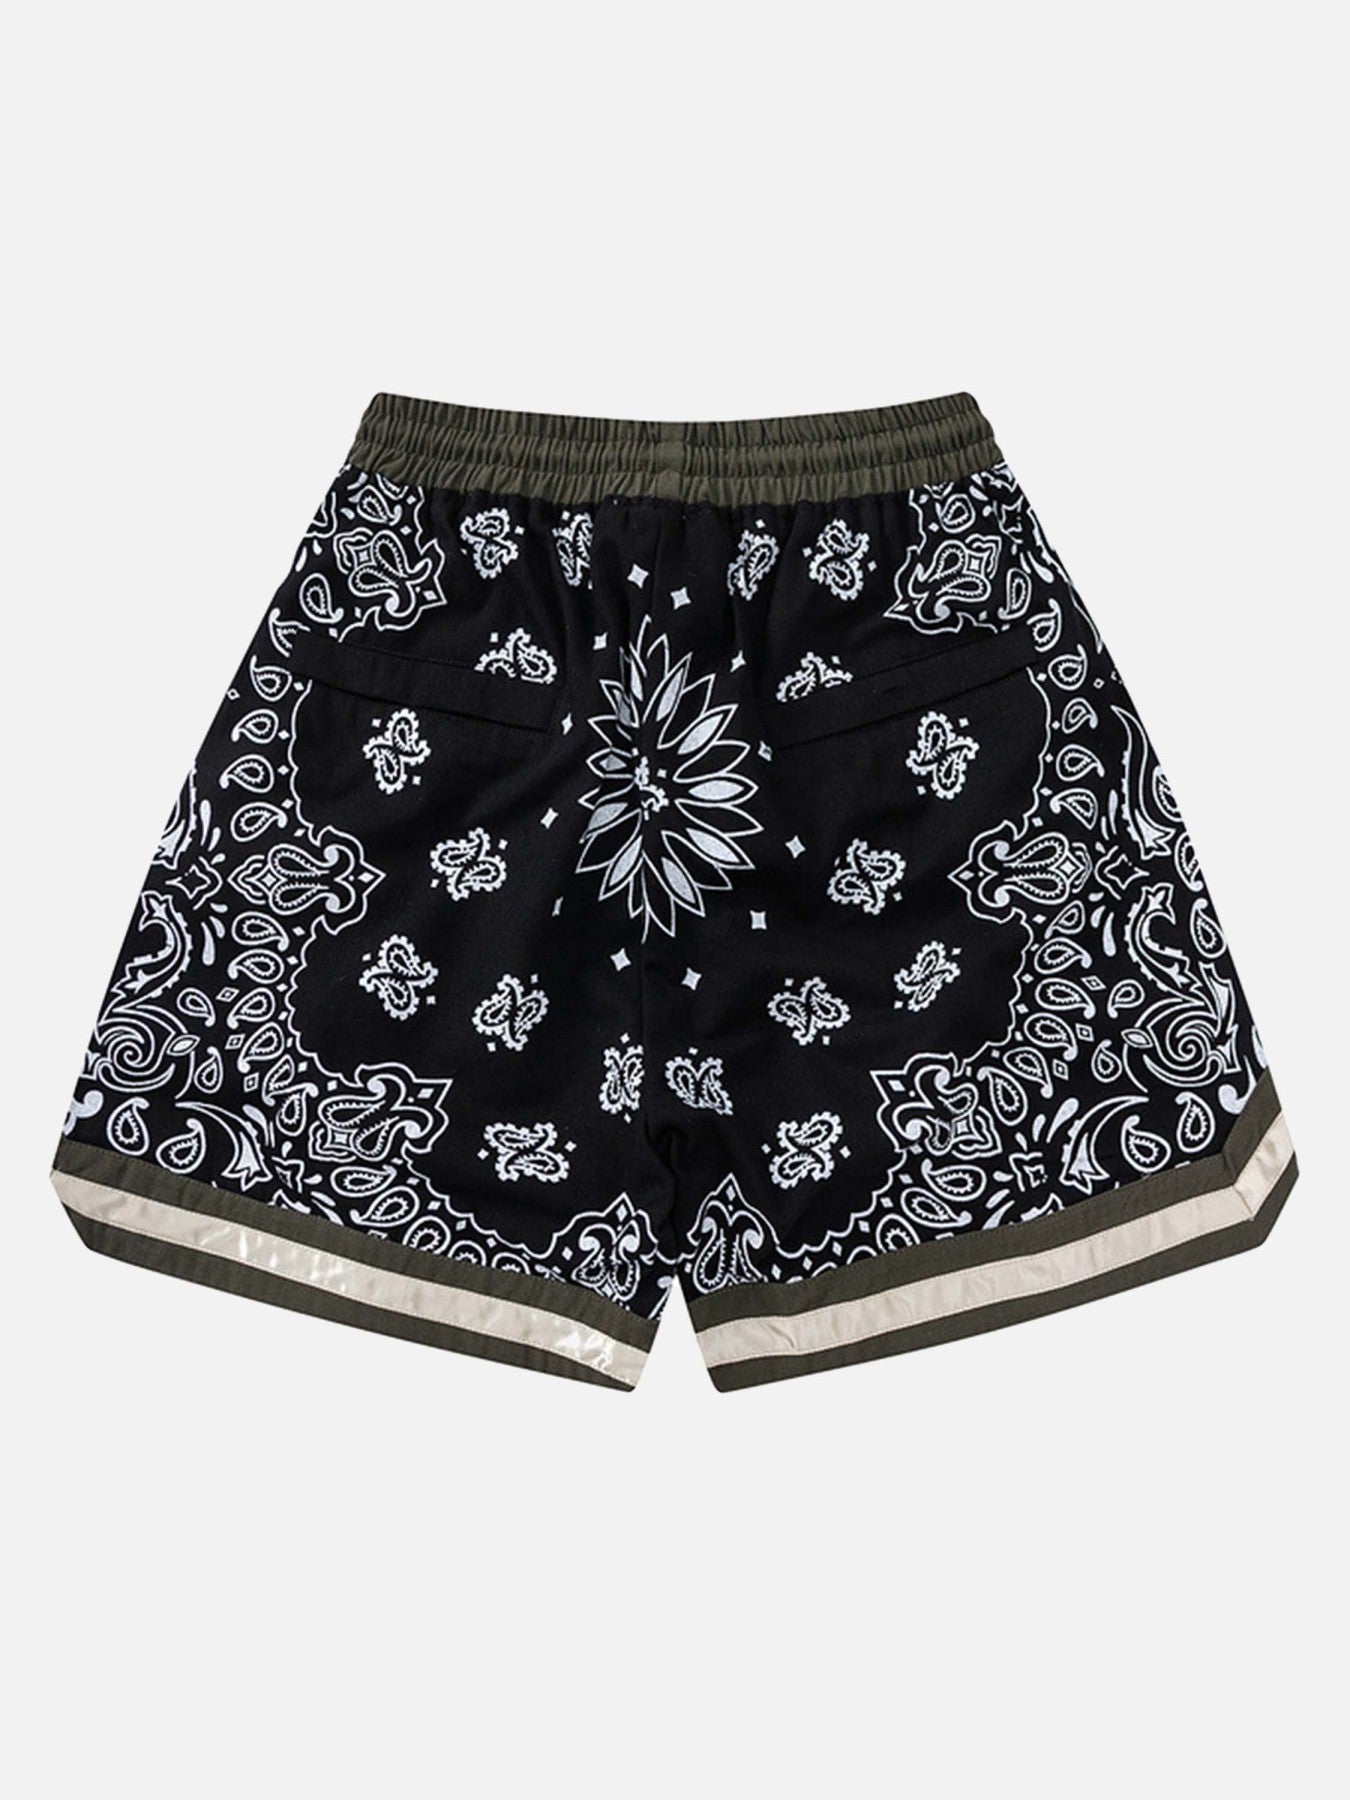 The Supermade High Street Cashew Flower Casual Shorts